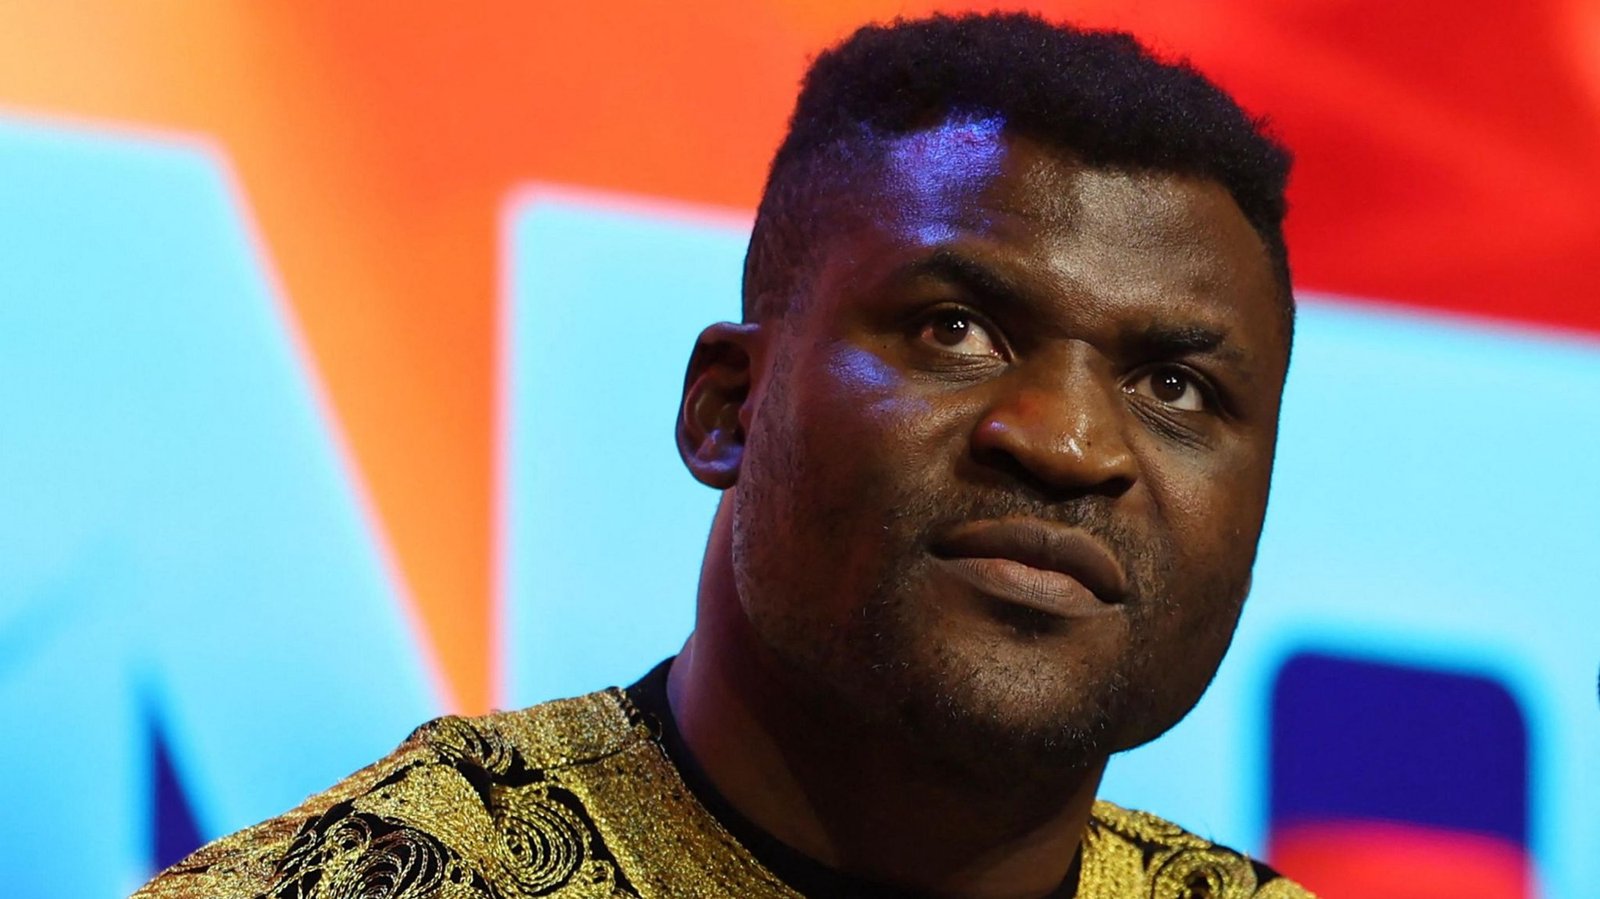 Mourning the Loss: Francis Ngannou’s Heartbreaking Tribute to His Son